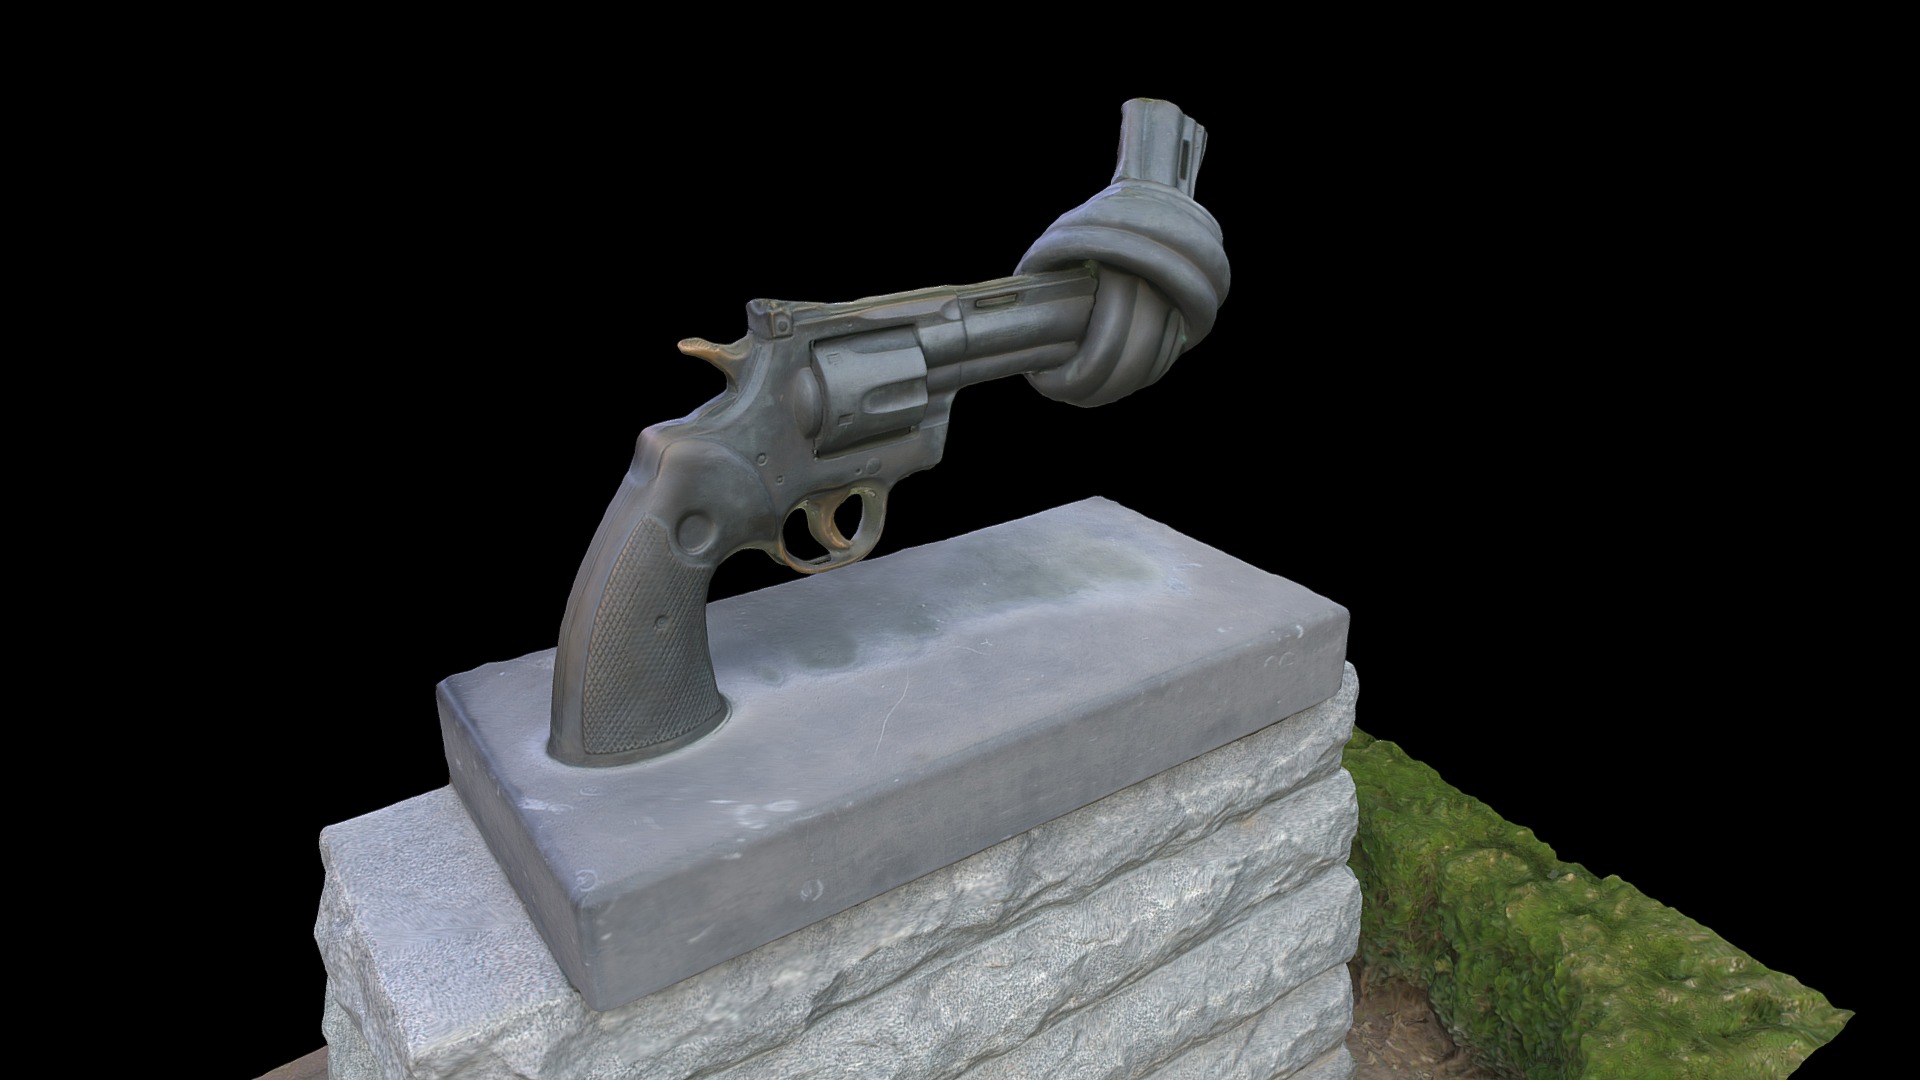 3D model 2018-09 – Beijing 42 - This is a 3D model of the 2018-09 - Beijing 42. The 3D model is about a statue of a person holding a gun.